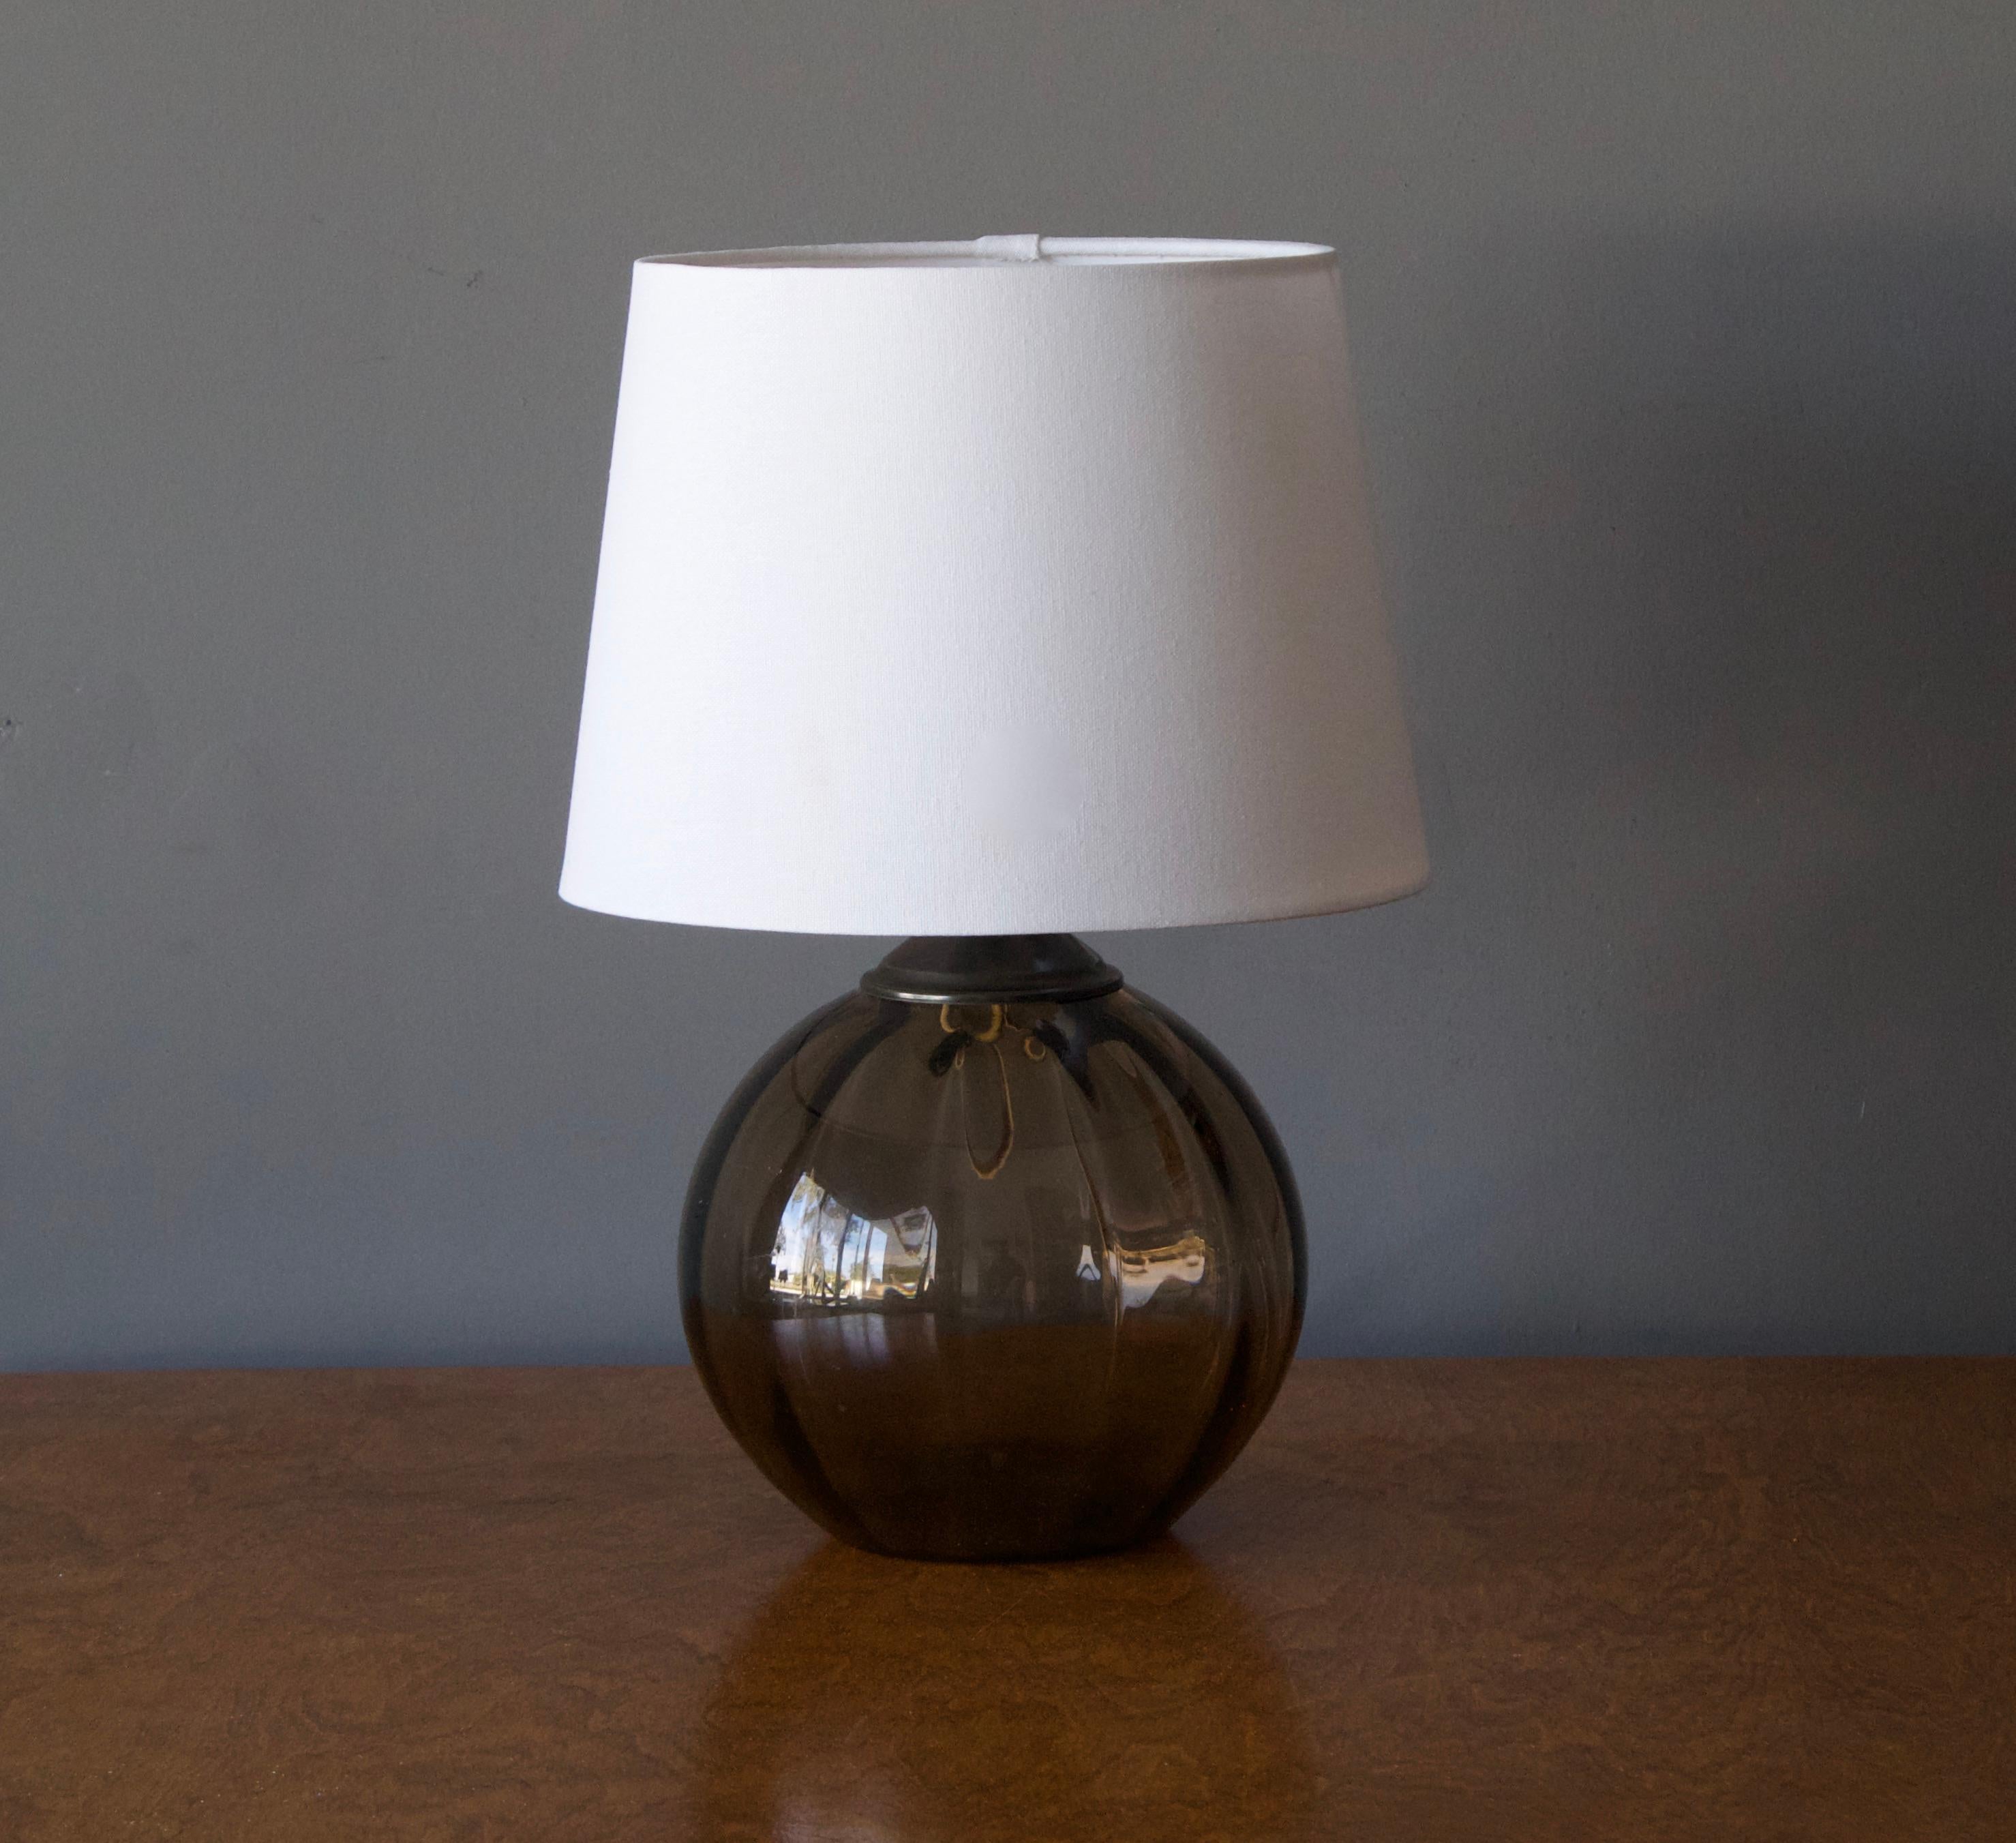 A modernist table lamp, design attributed to Edward Hald. Production attributed to Orrefors, c. 1930s. Blown smoked glass, patinated brass, porcelein socket. 

Stated dimensions exclude lampshade. Height includes socket. Sold without lampshade.